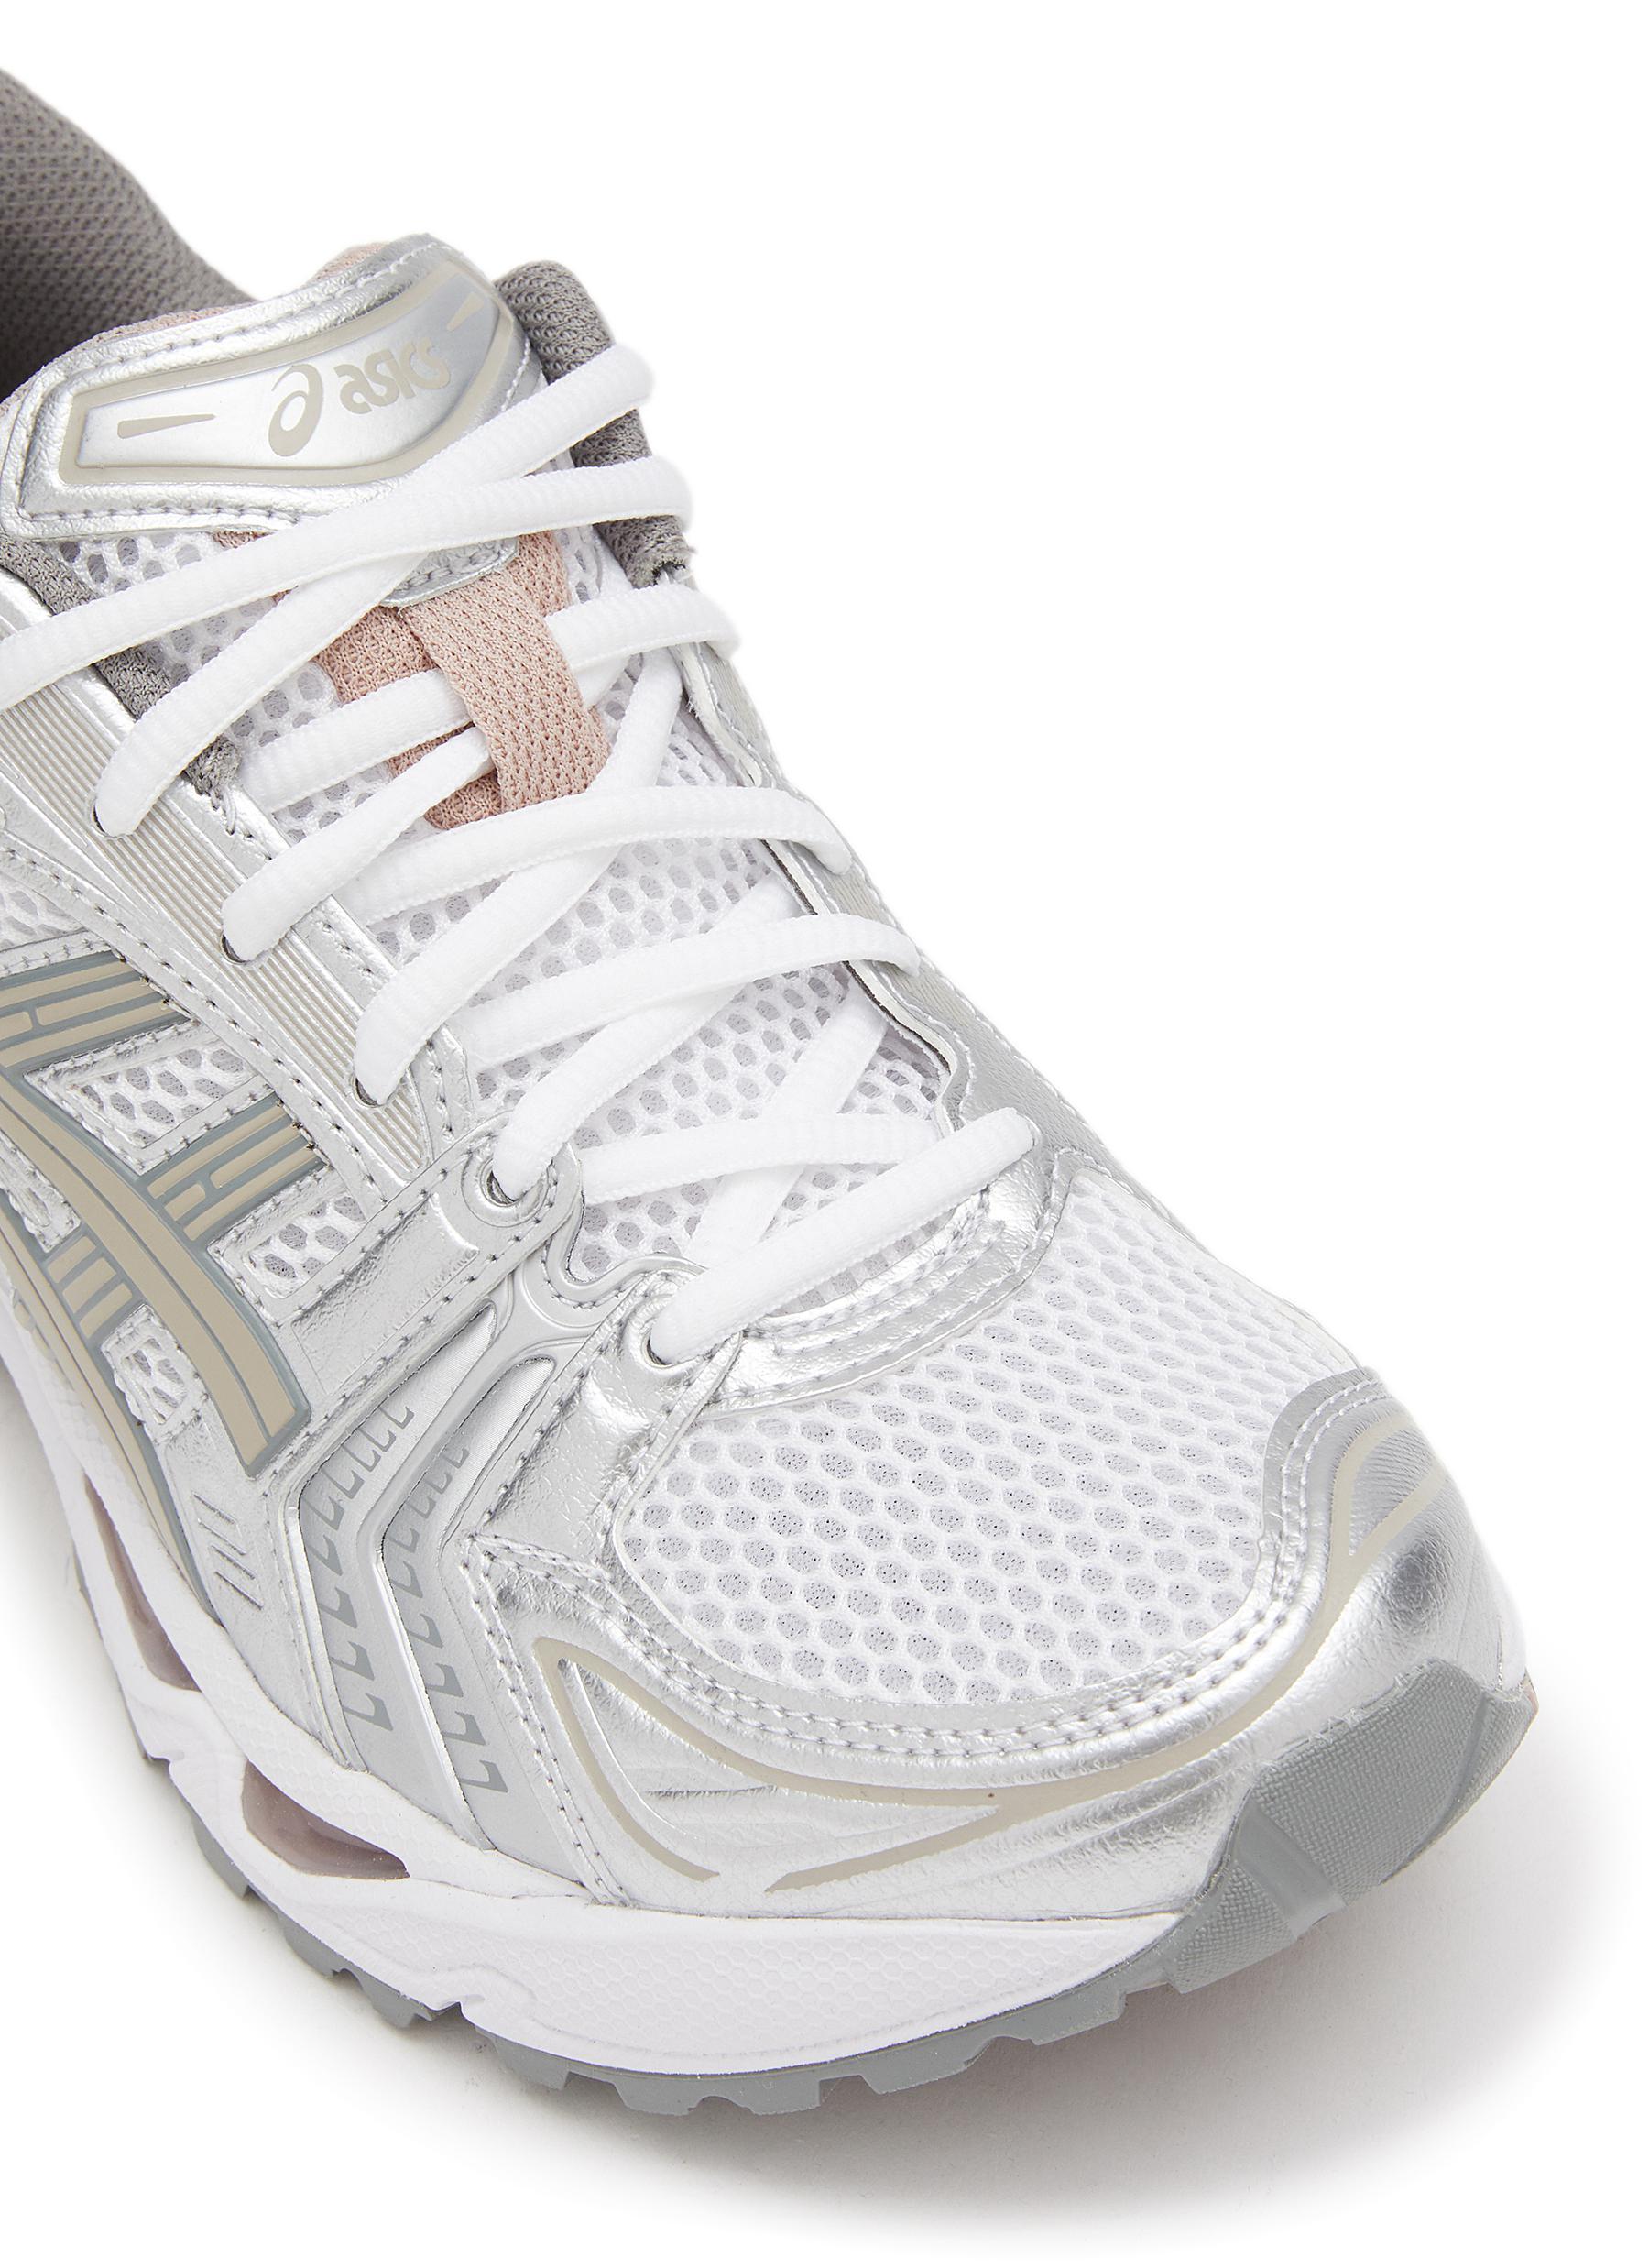 Asics 'gel-kayano 14' Low Top Lace Up Mesh Sneakers in White | Lyst